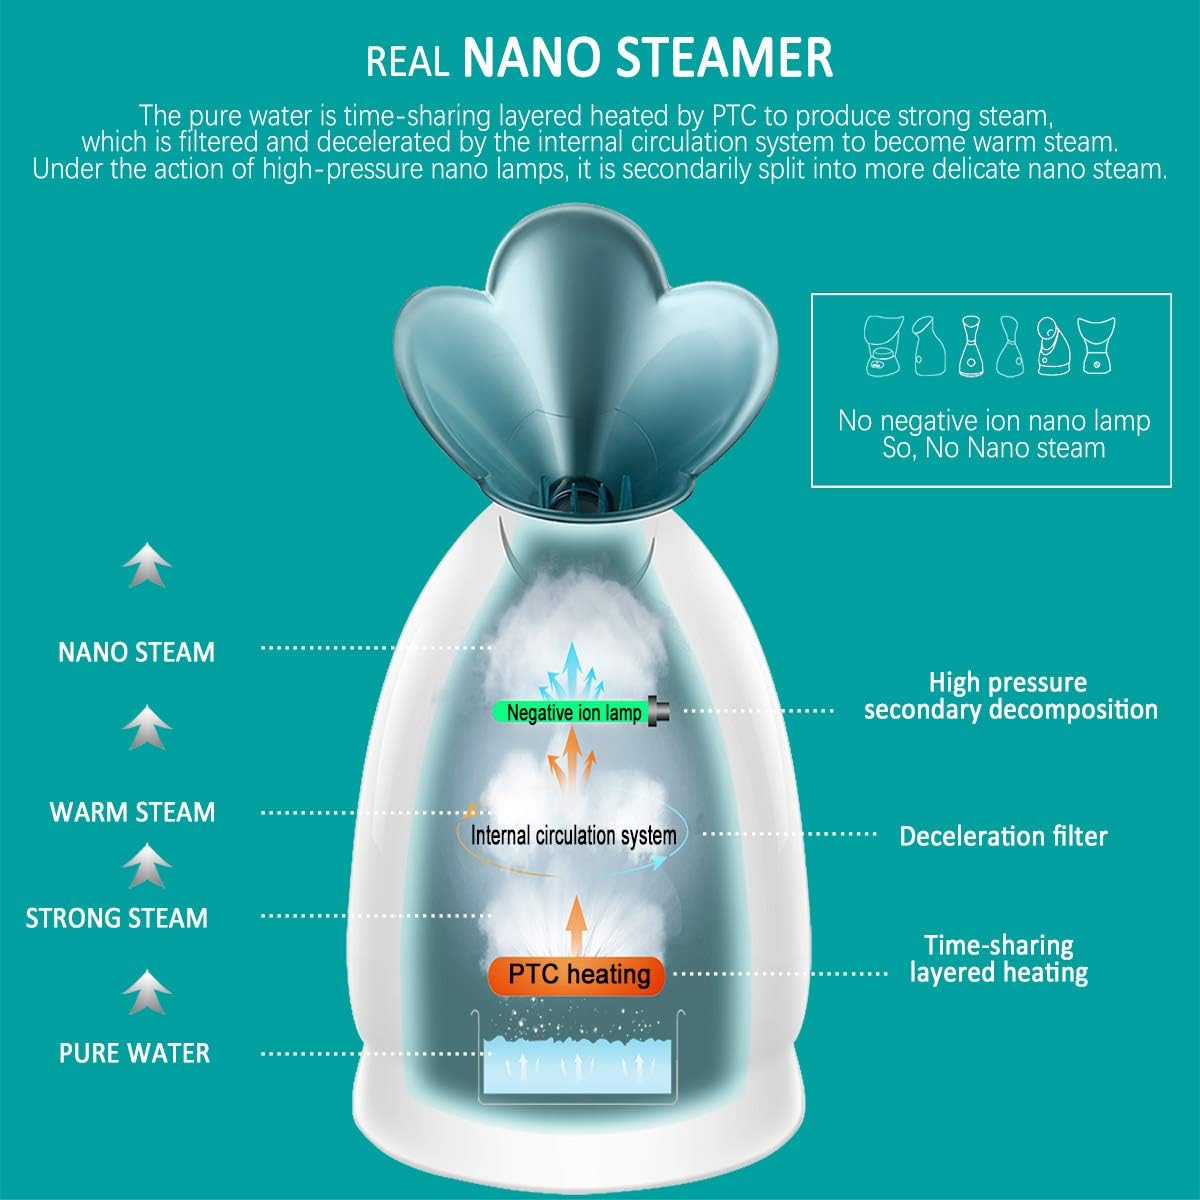 REAKOO Facial Steamer Hot Mist Moisturizing, Unclogs Pores, Warm Mist Humidifier Atomizer, Home Spa with Aromatherapy Design